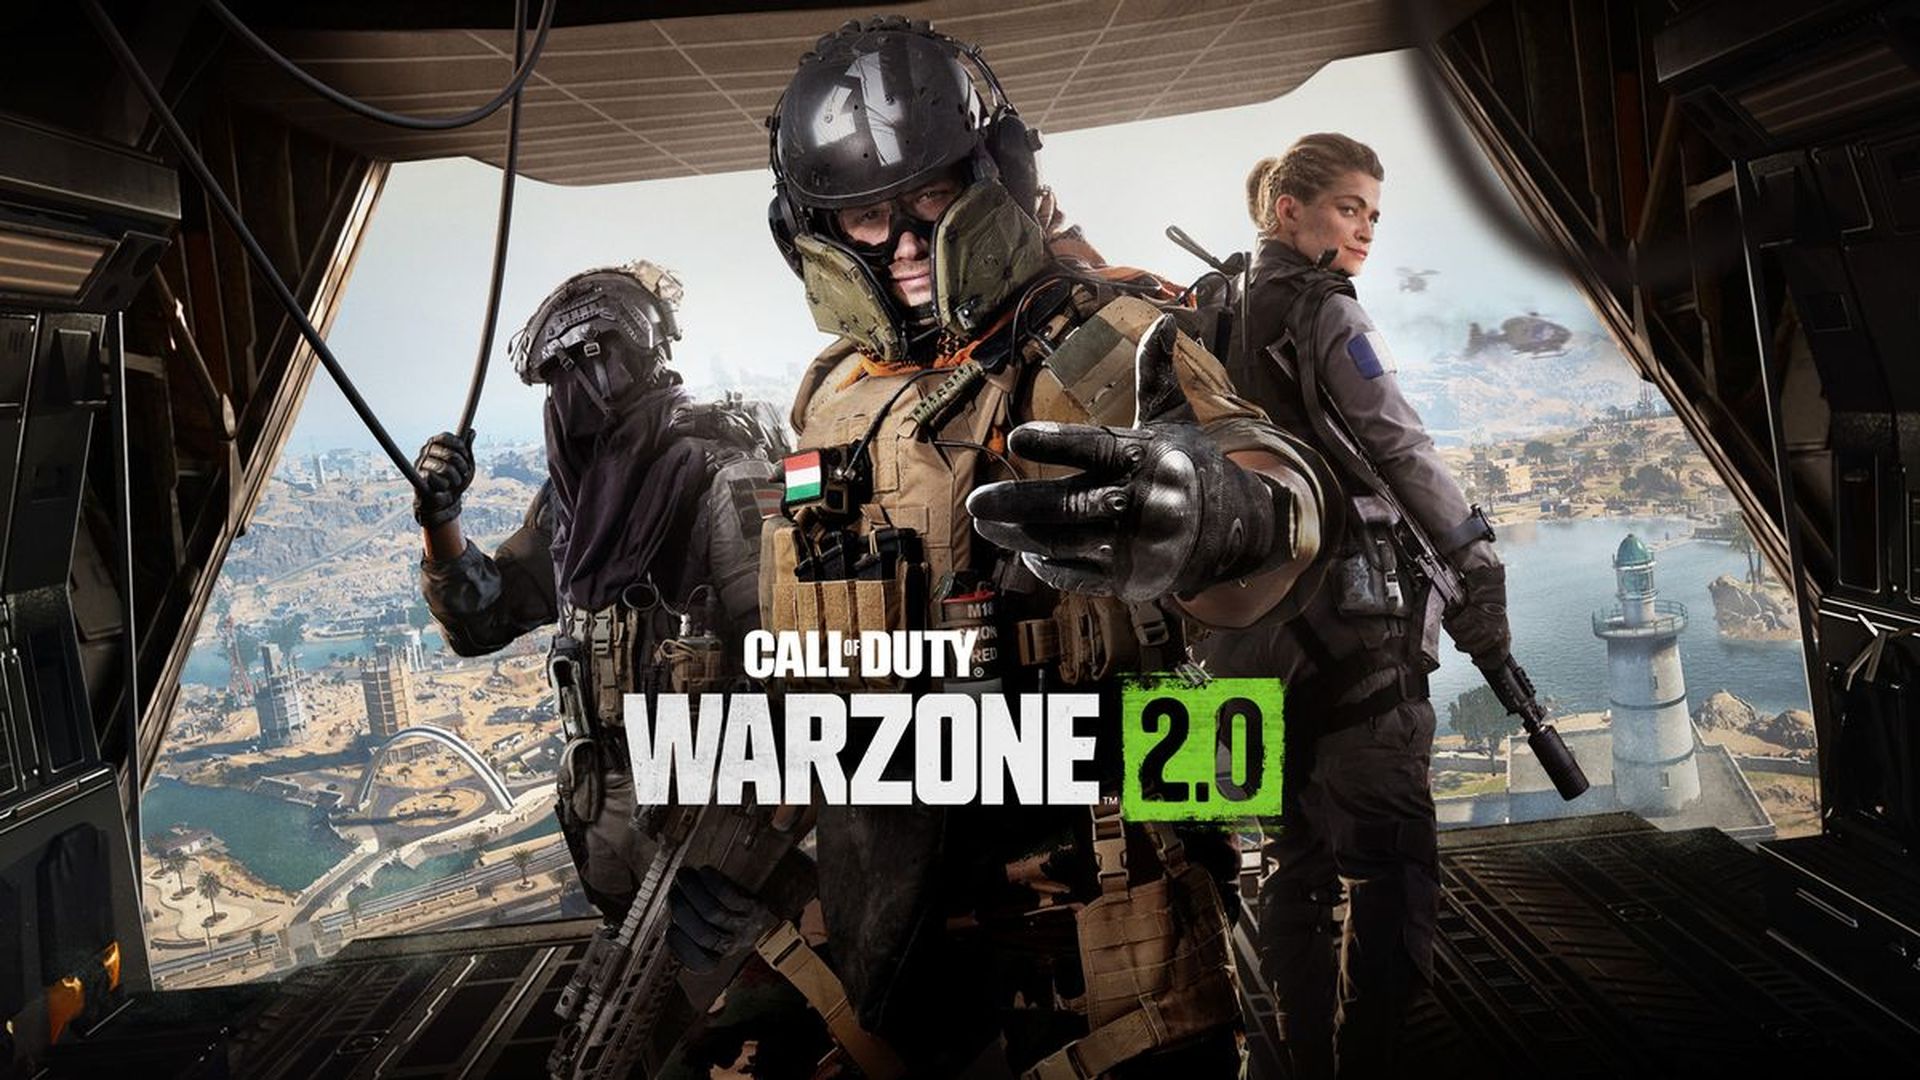 Are you wondering "Where are my 50 tier skips?" If that is the case, today we'll tell you how you can fix MW2 tier skips not working in CoD: Warzone 2.0.